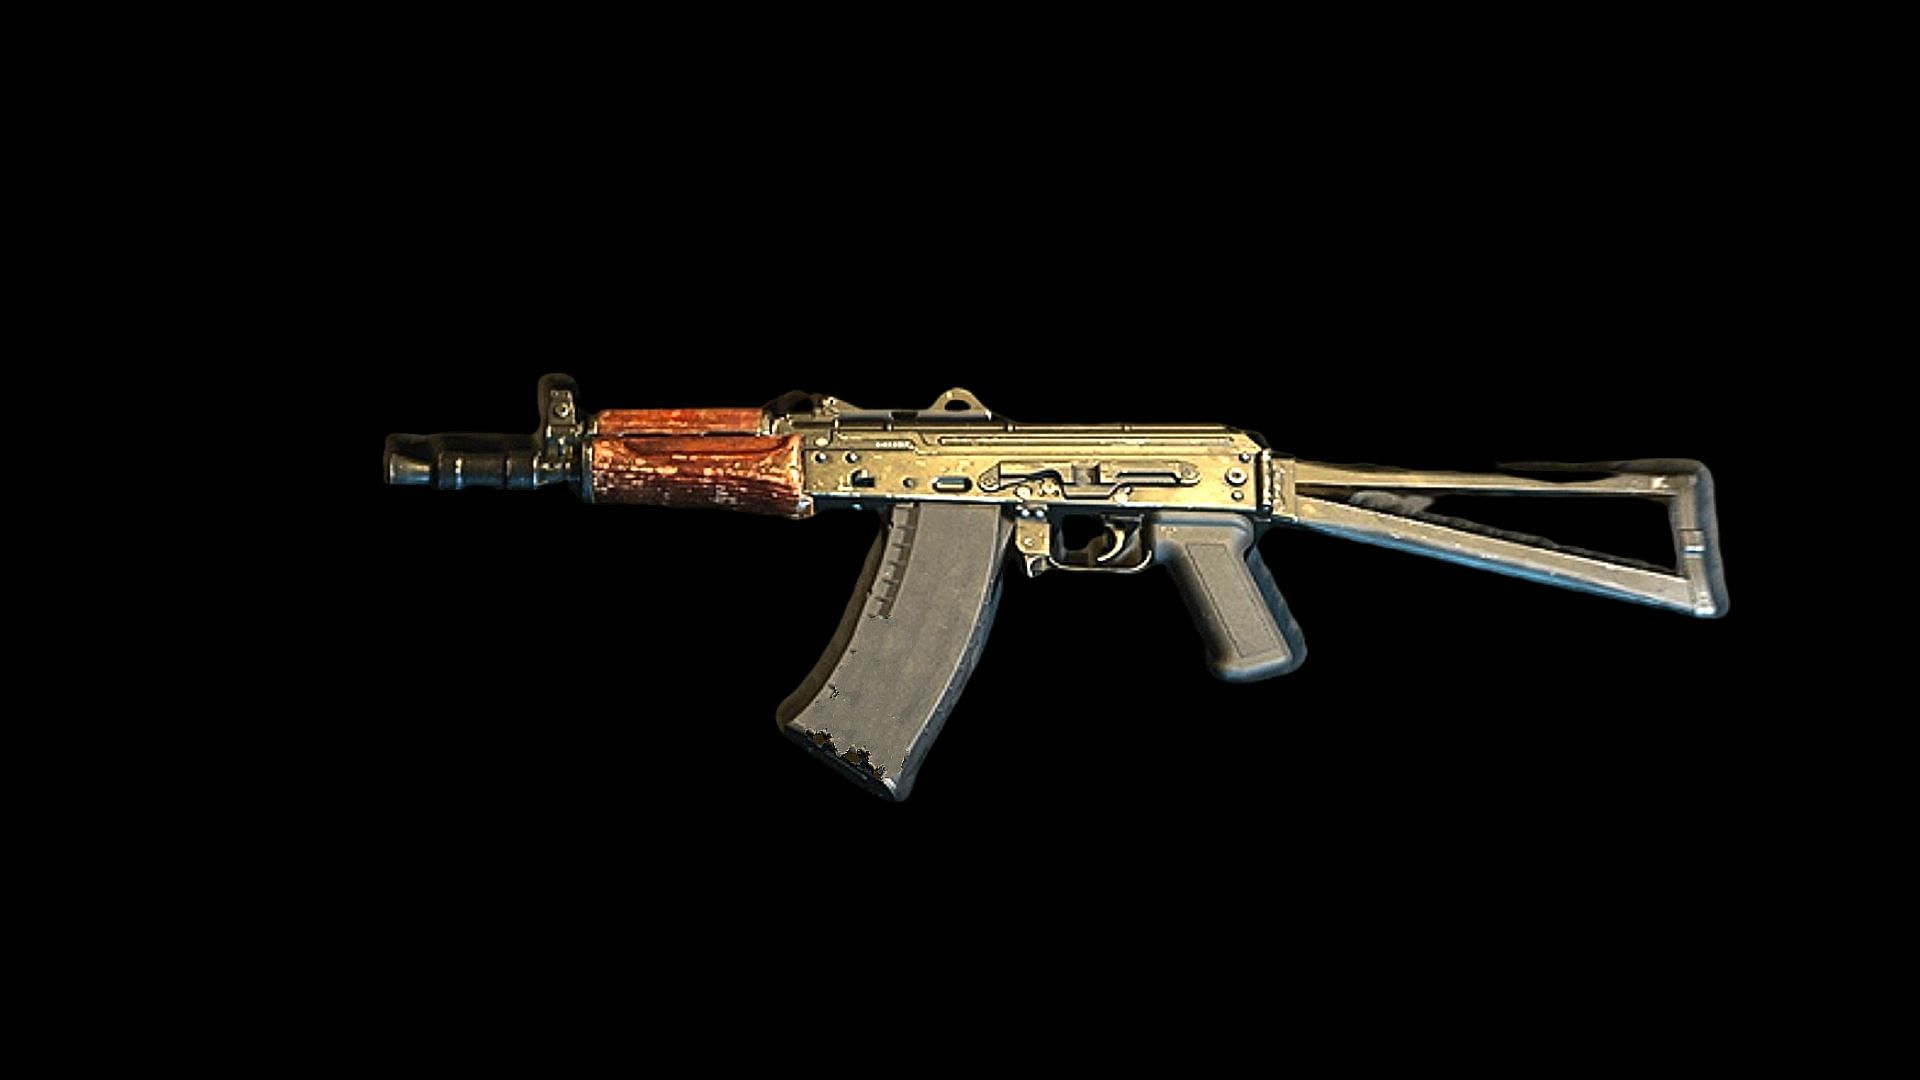 The Kastov-74u assault rifle in MW2 and Warzone 2.0 (Image via Activision)